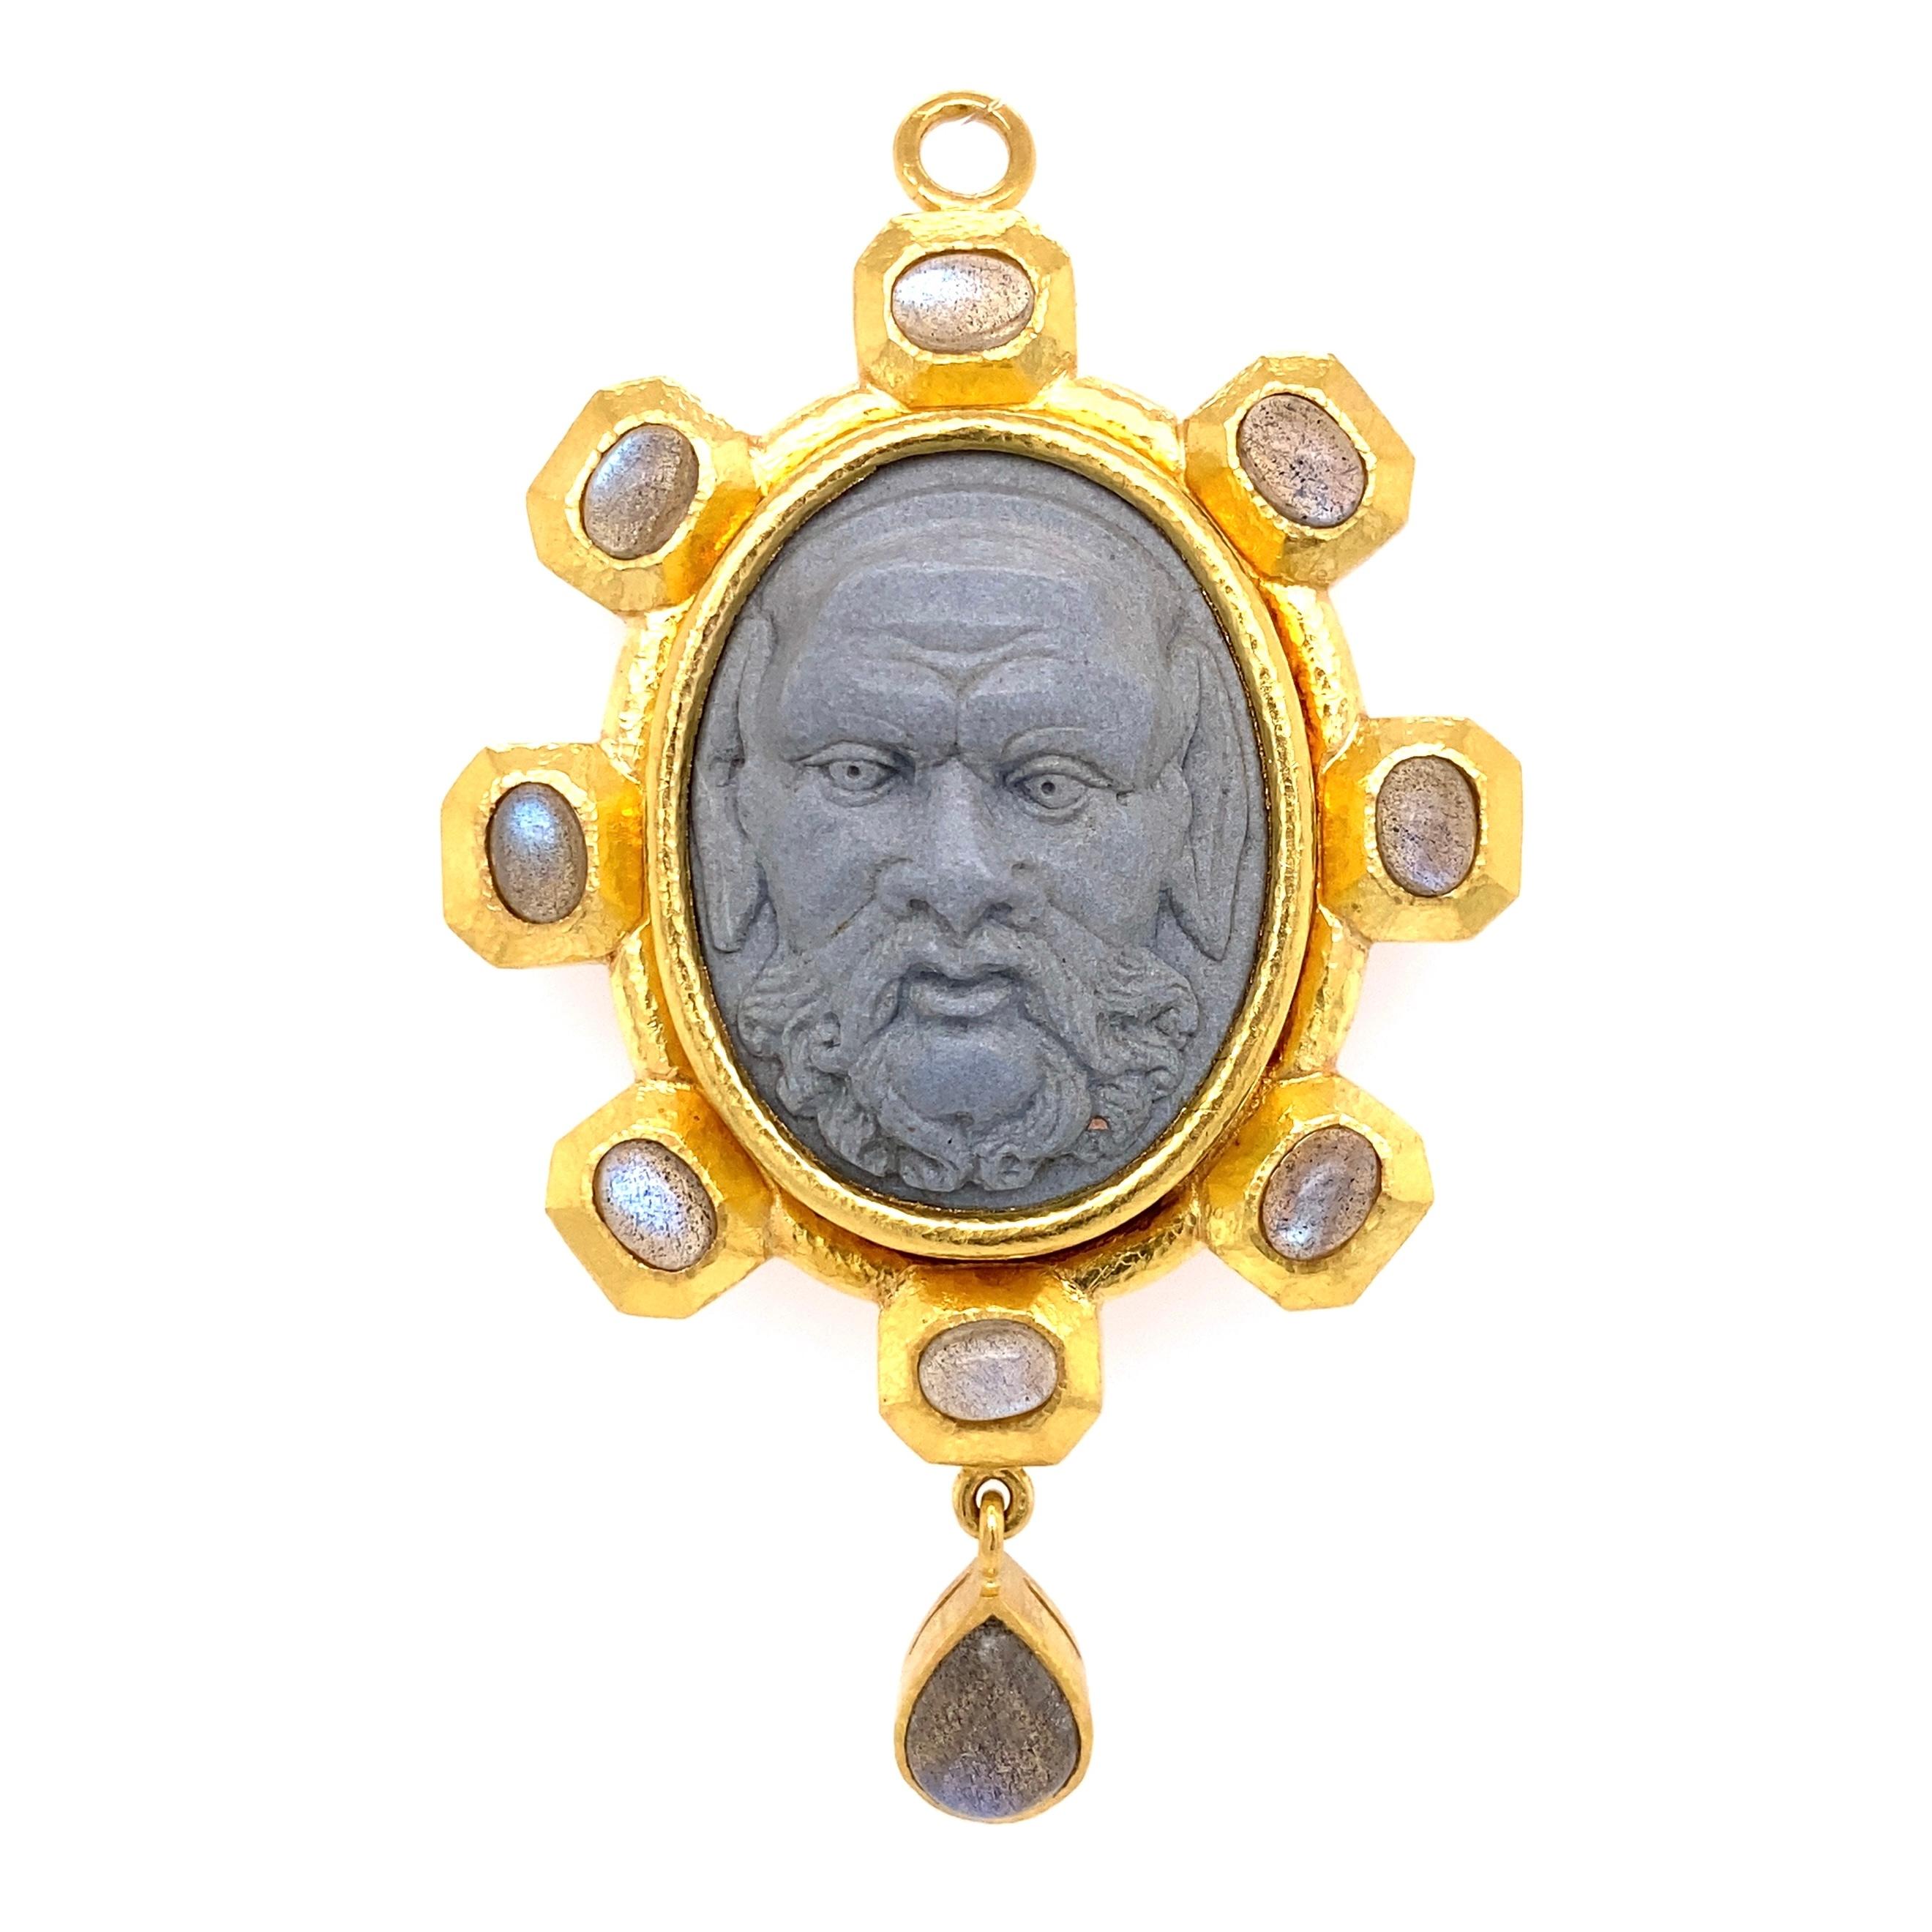 Simply Fabulous! Designer Signed Elizabeth Locke Carved Lava Cameo, depicting Jupiter, accented by 9 Moonstone, approx. 5.50tcw. Beautifully Hand crafted in 19K Yellow Gold. Measuring approx. 3” x 1.75. More Beautiful in real time! Classic and